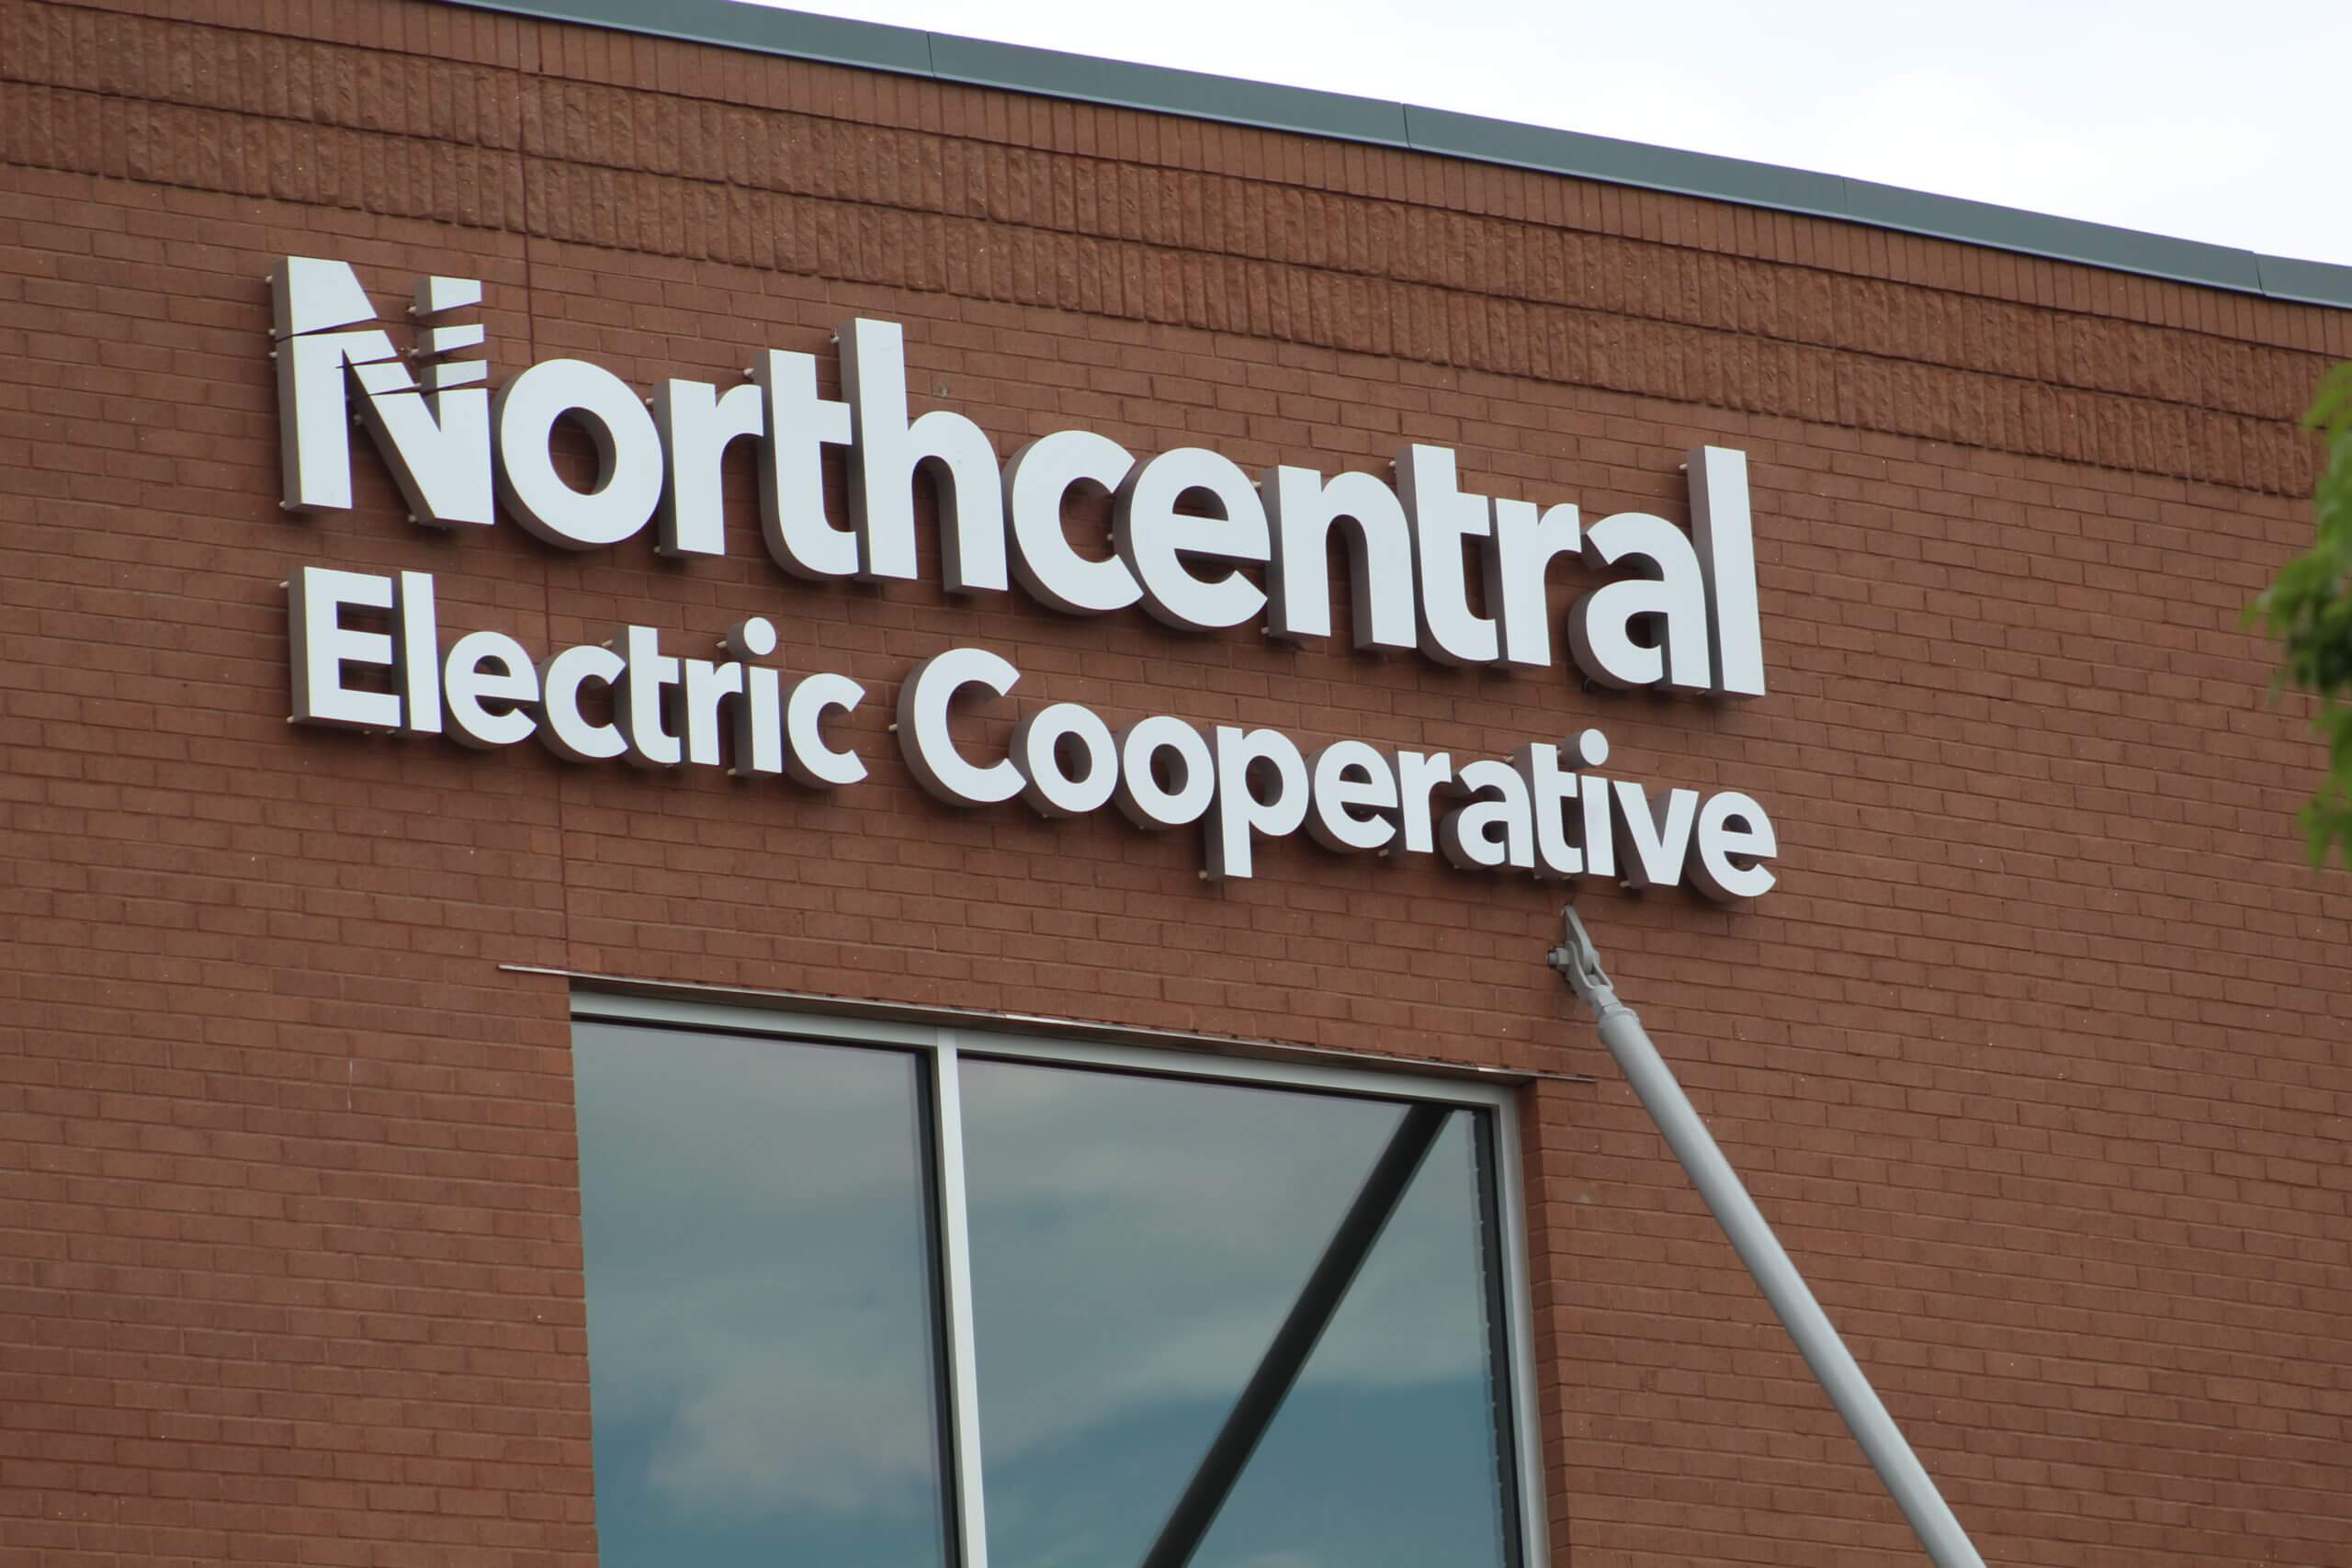 Power companies work to return service after ice storm